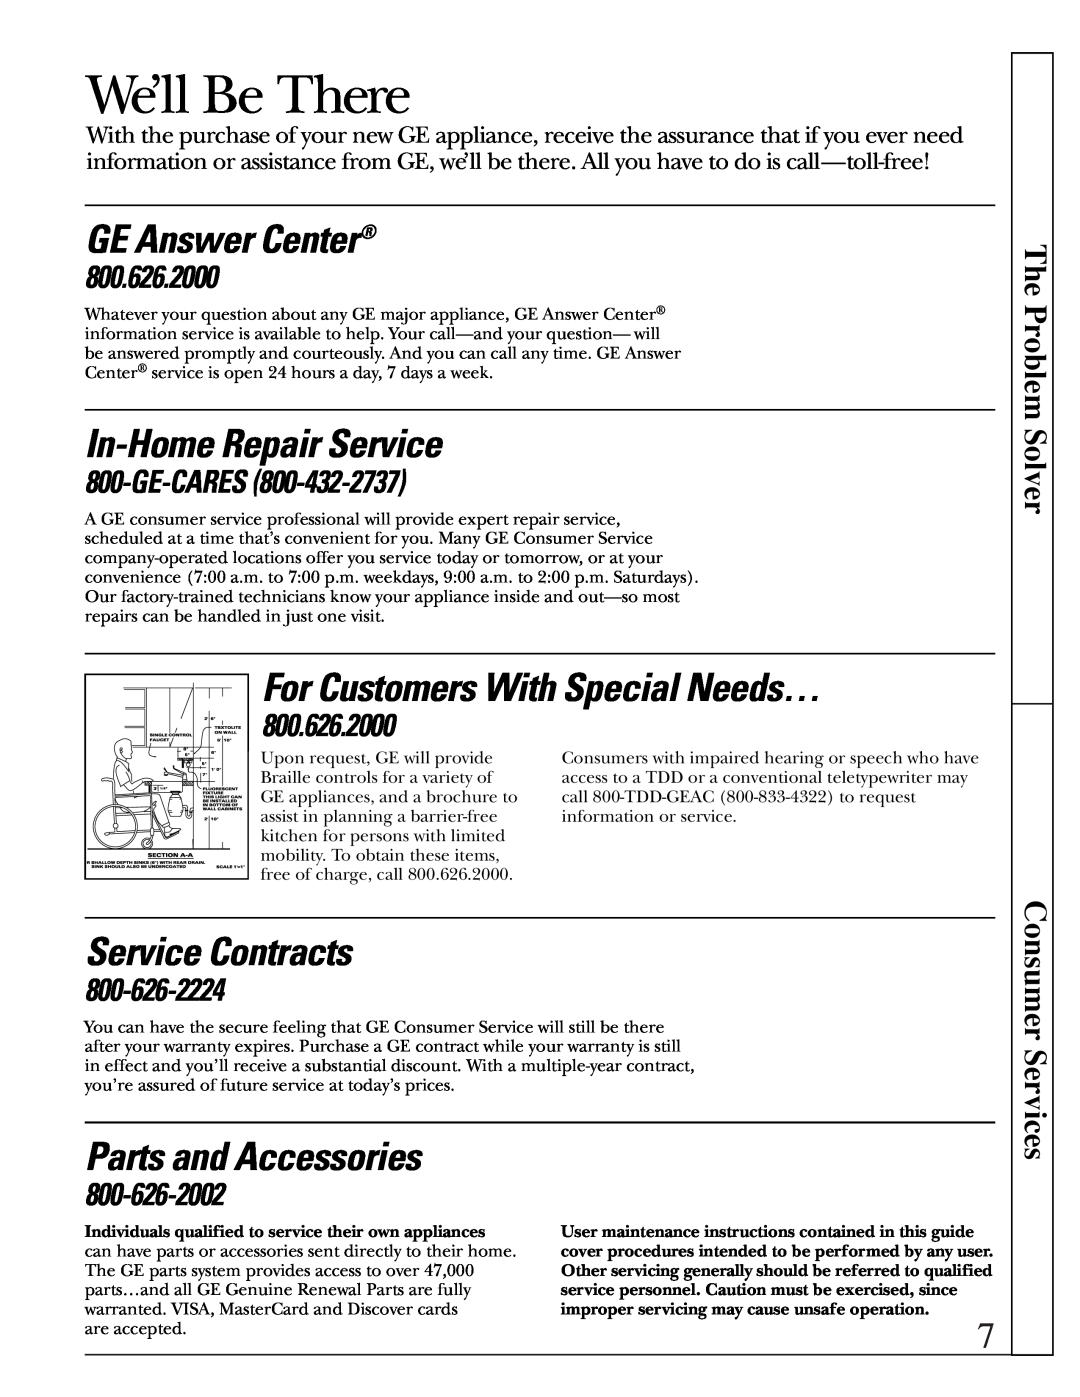 GE JV960 The Problem Solver, We’ll Be There, GE Answer Center, In-Home Repair Service, For Customers With Special Needs… 